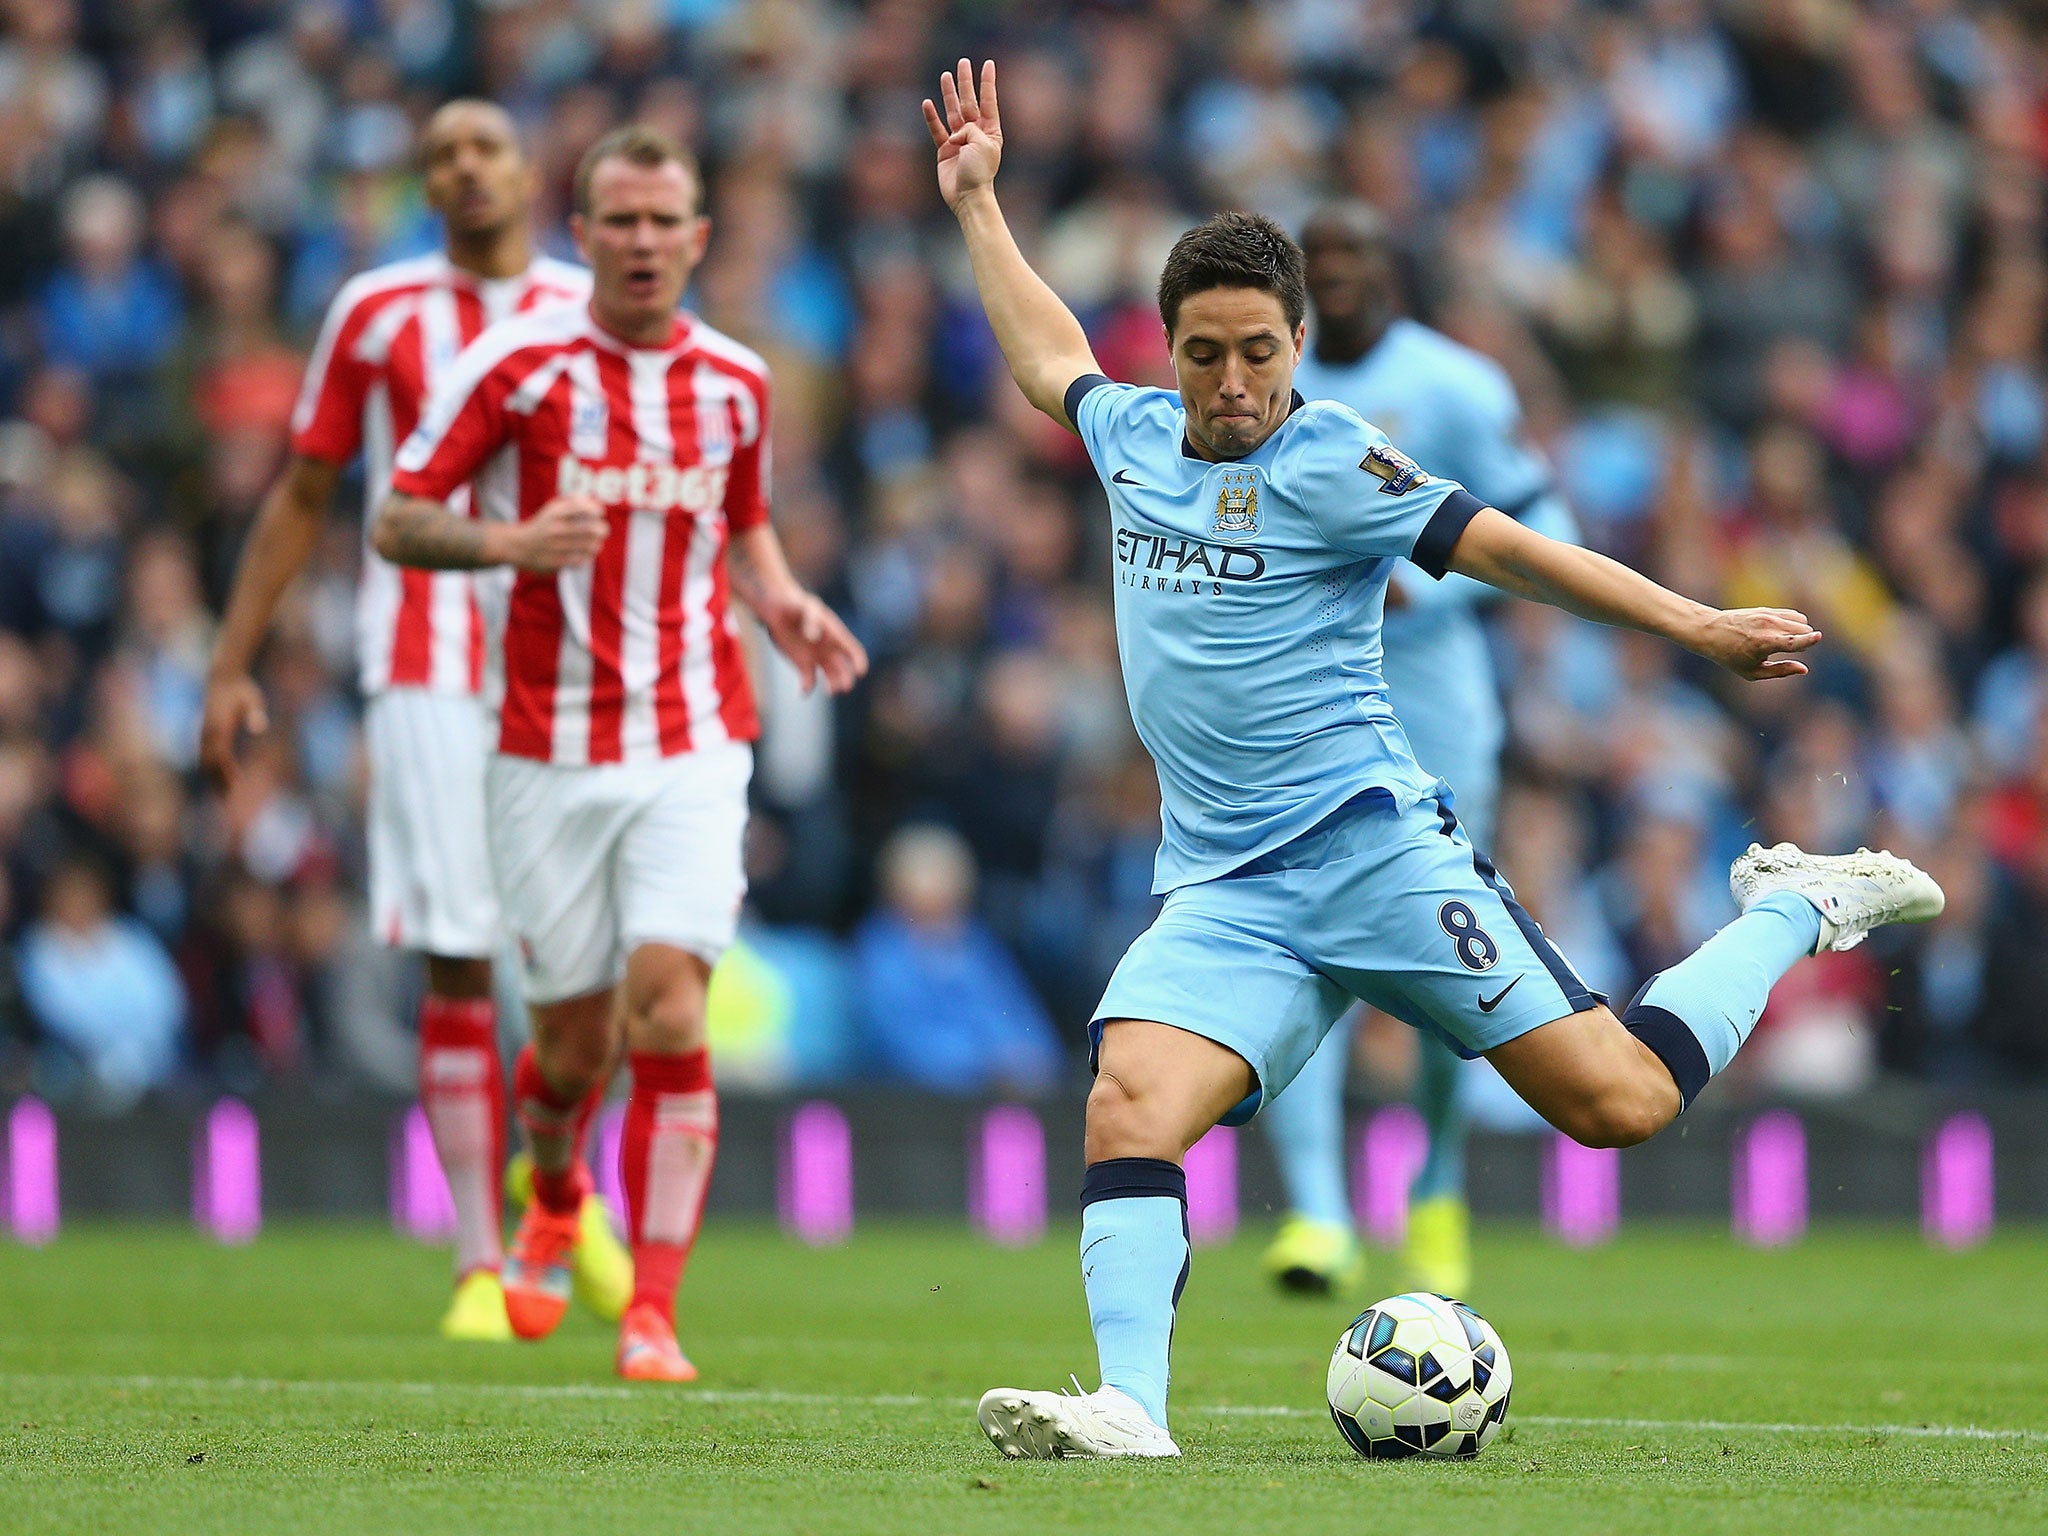 Samir Nasri believes Chelsea and Manchester United will pose the biggest threat this season to Manchester City